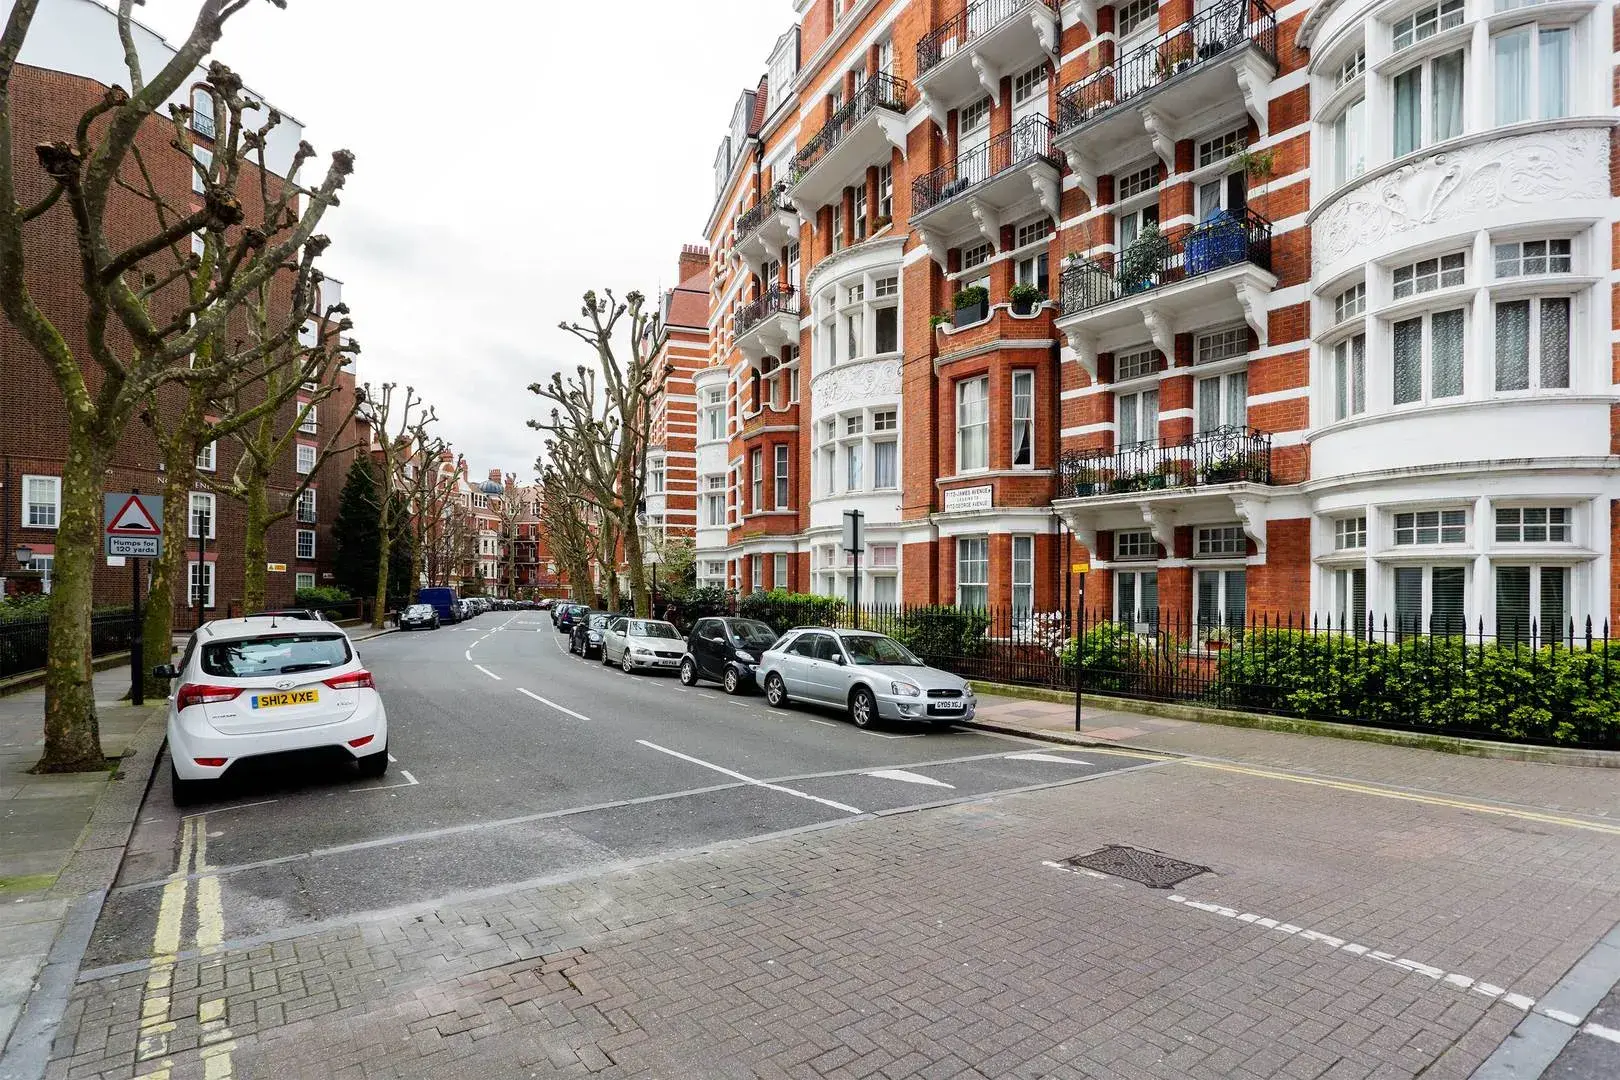 Fitzjames Avenue, holiday home in Kensington, London